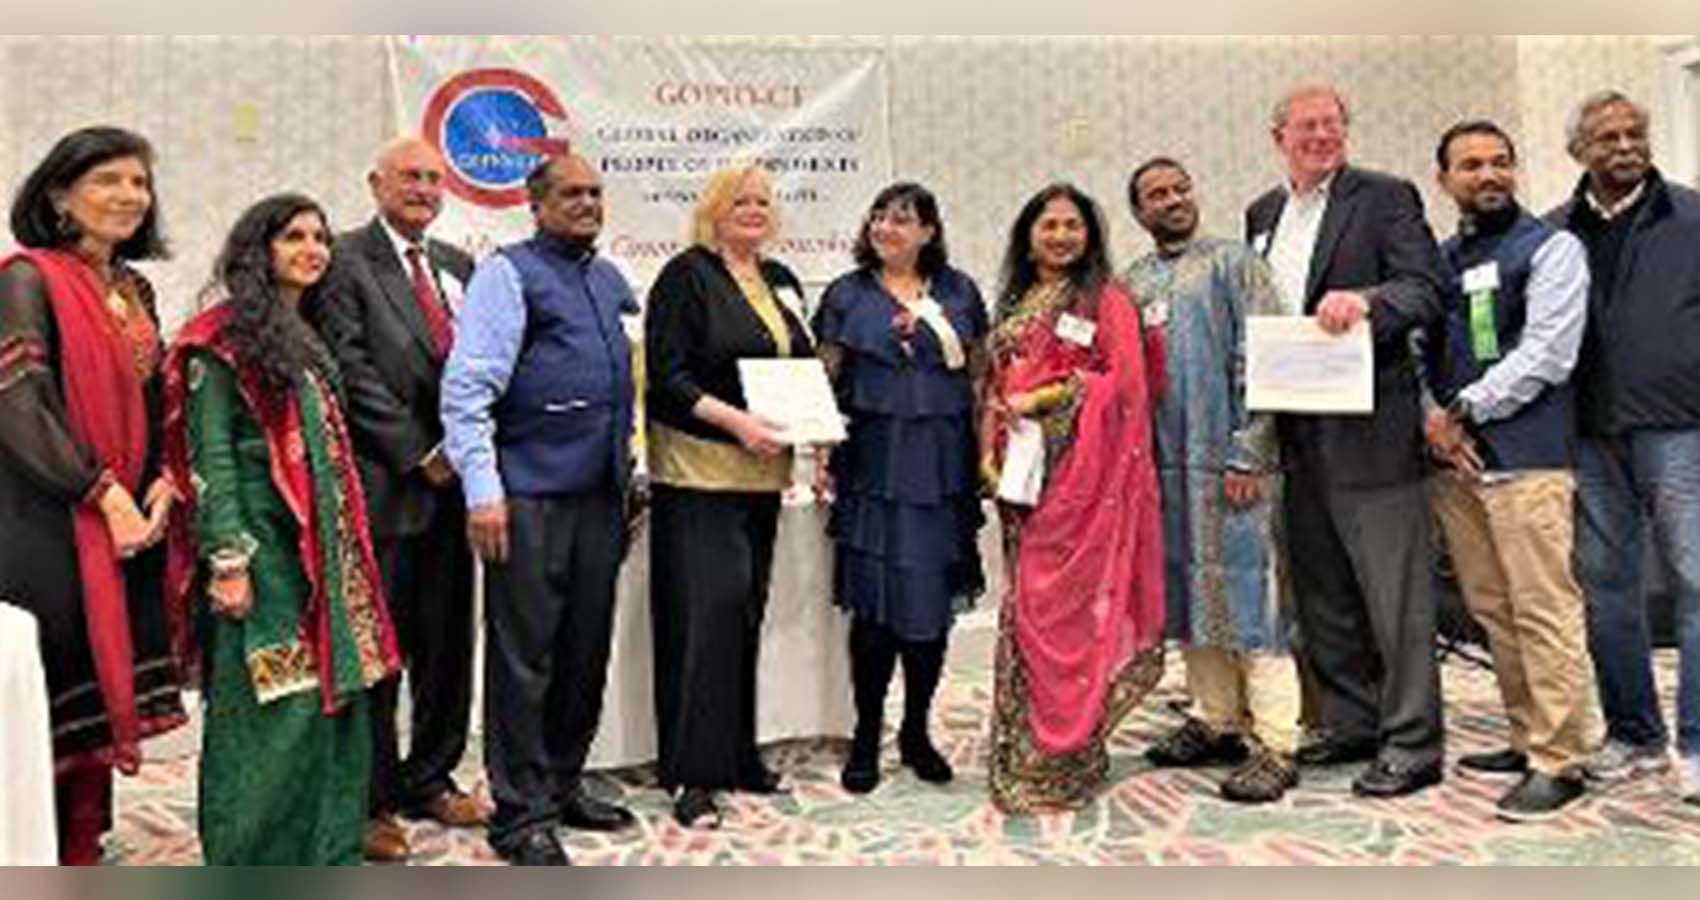 GOPIO-CT Celebrates Diwali By Supporting Local Charities